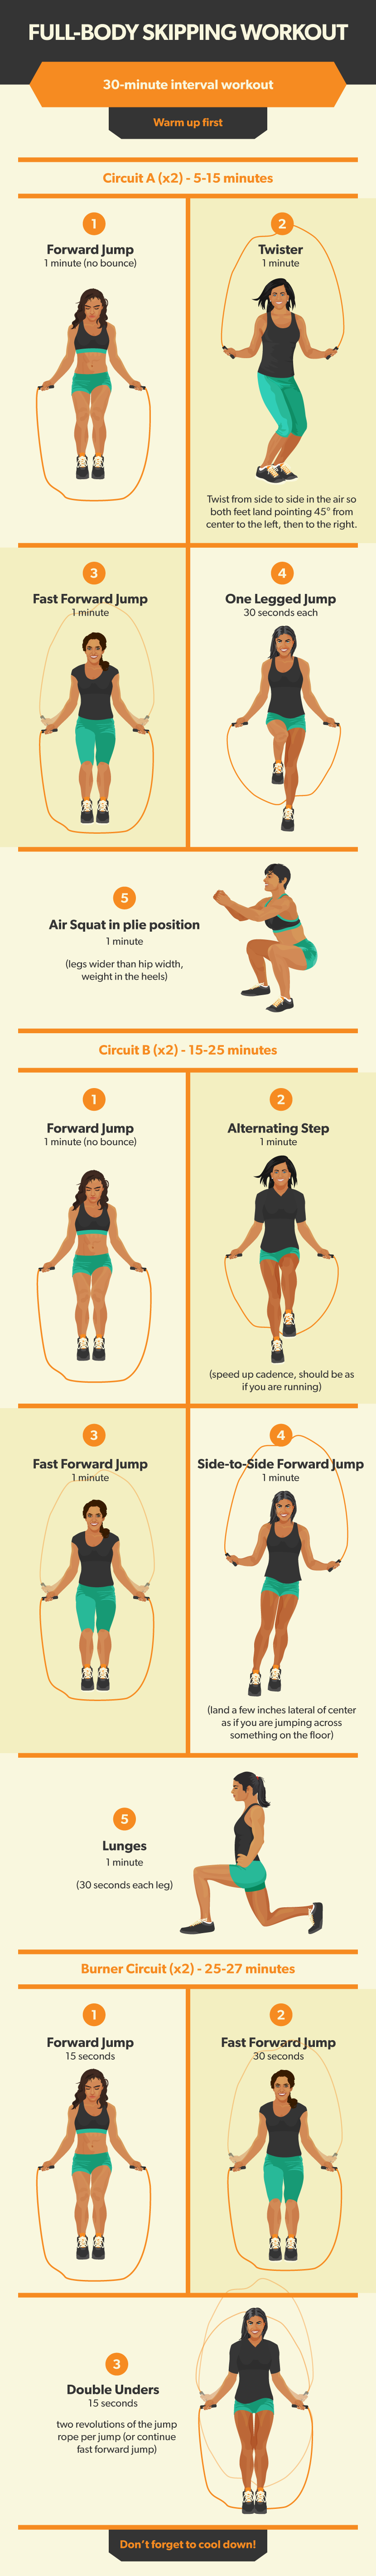 Full-Body Skipping Workout - Hop to it! A Guide to Exercising With a Jump Rope